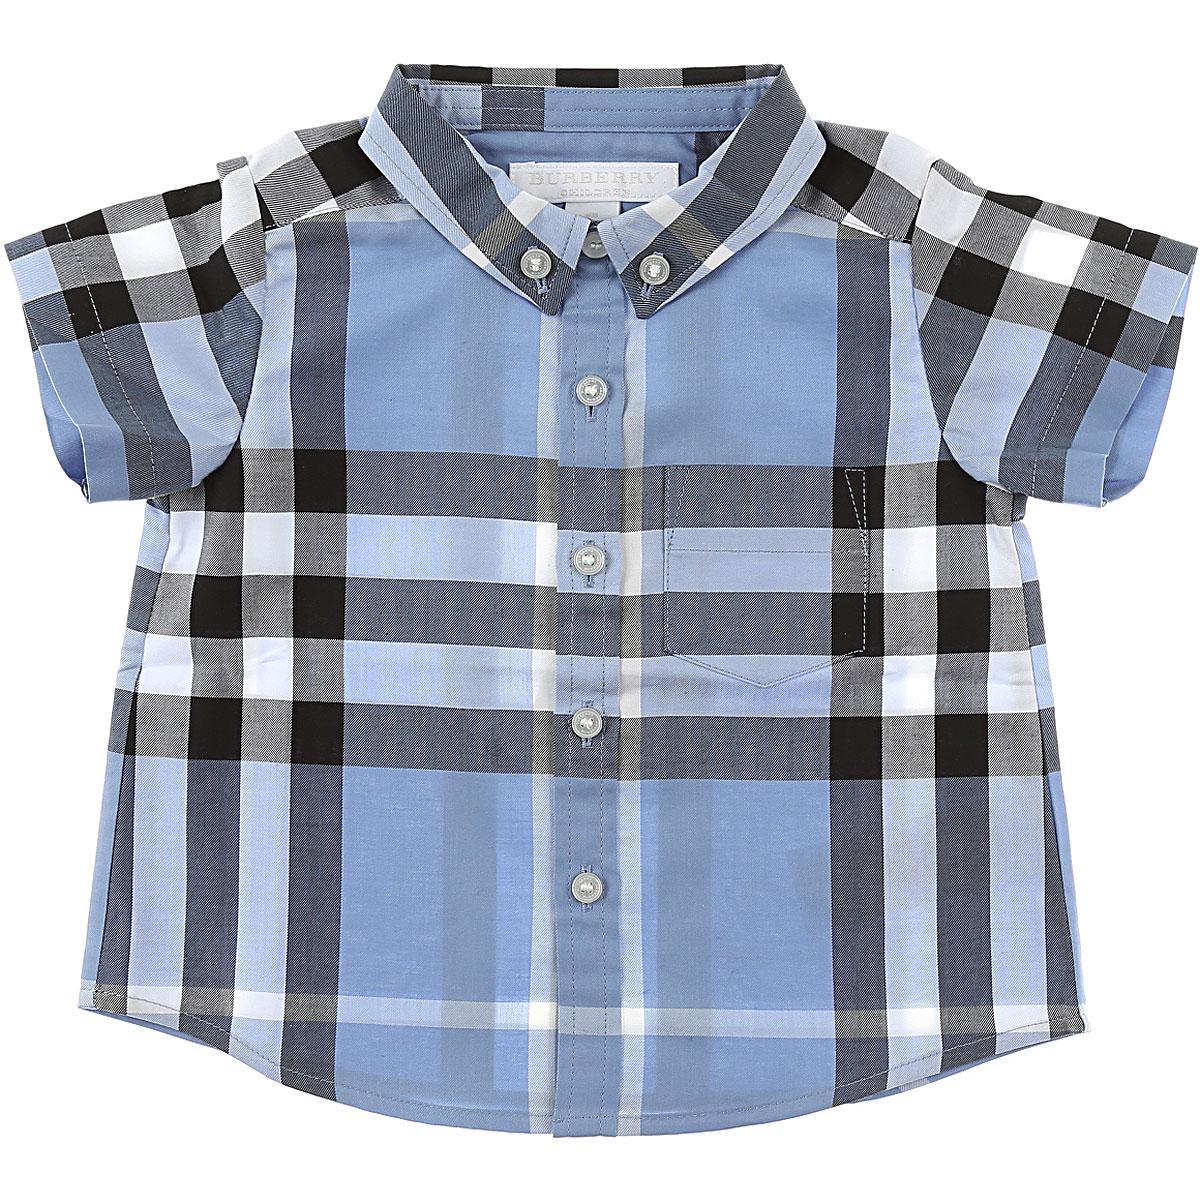 Burberry Baby Shirt Sale Italy, SAVE 52% 